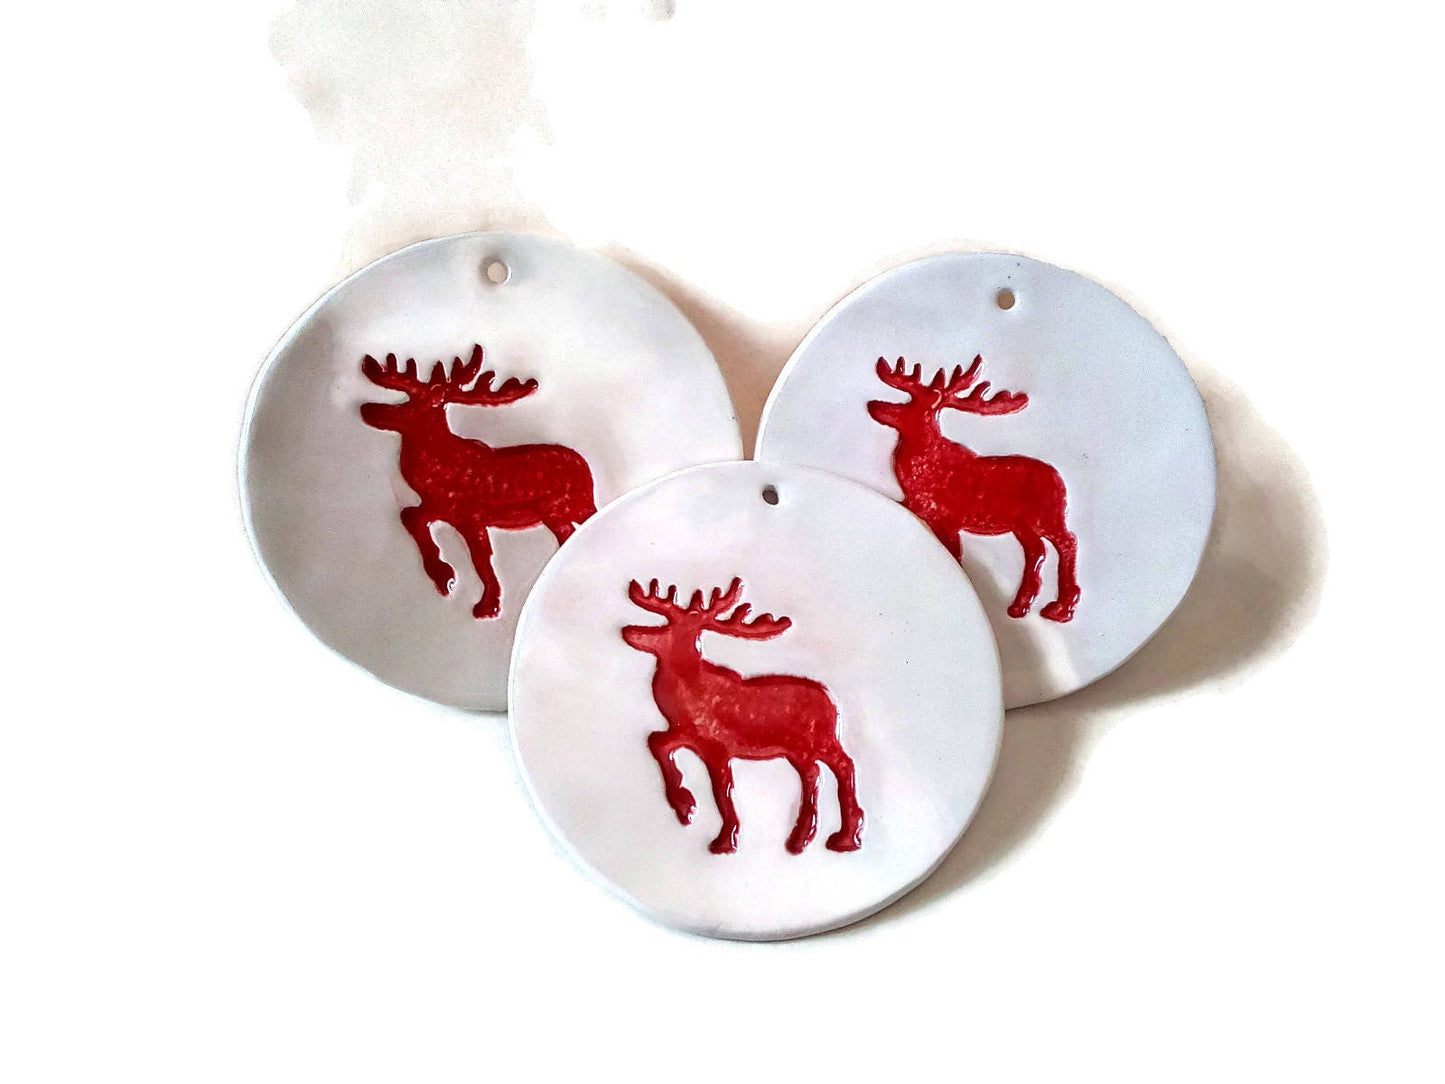 1Pc Handmade Ceramic Reindeer Ornaments For Wall Decor, Christmas Tree Red and White Ornaments, Pottery Wall Hanging For Winter Decoration - Ceramica Ana Rafael